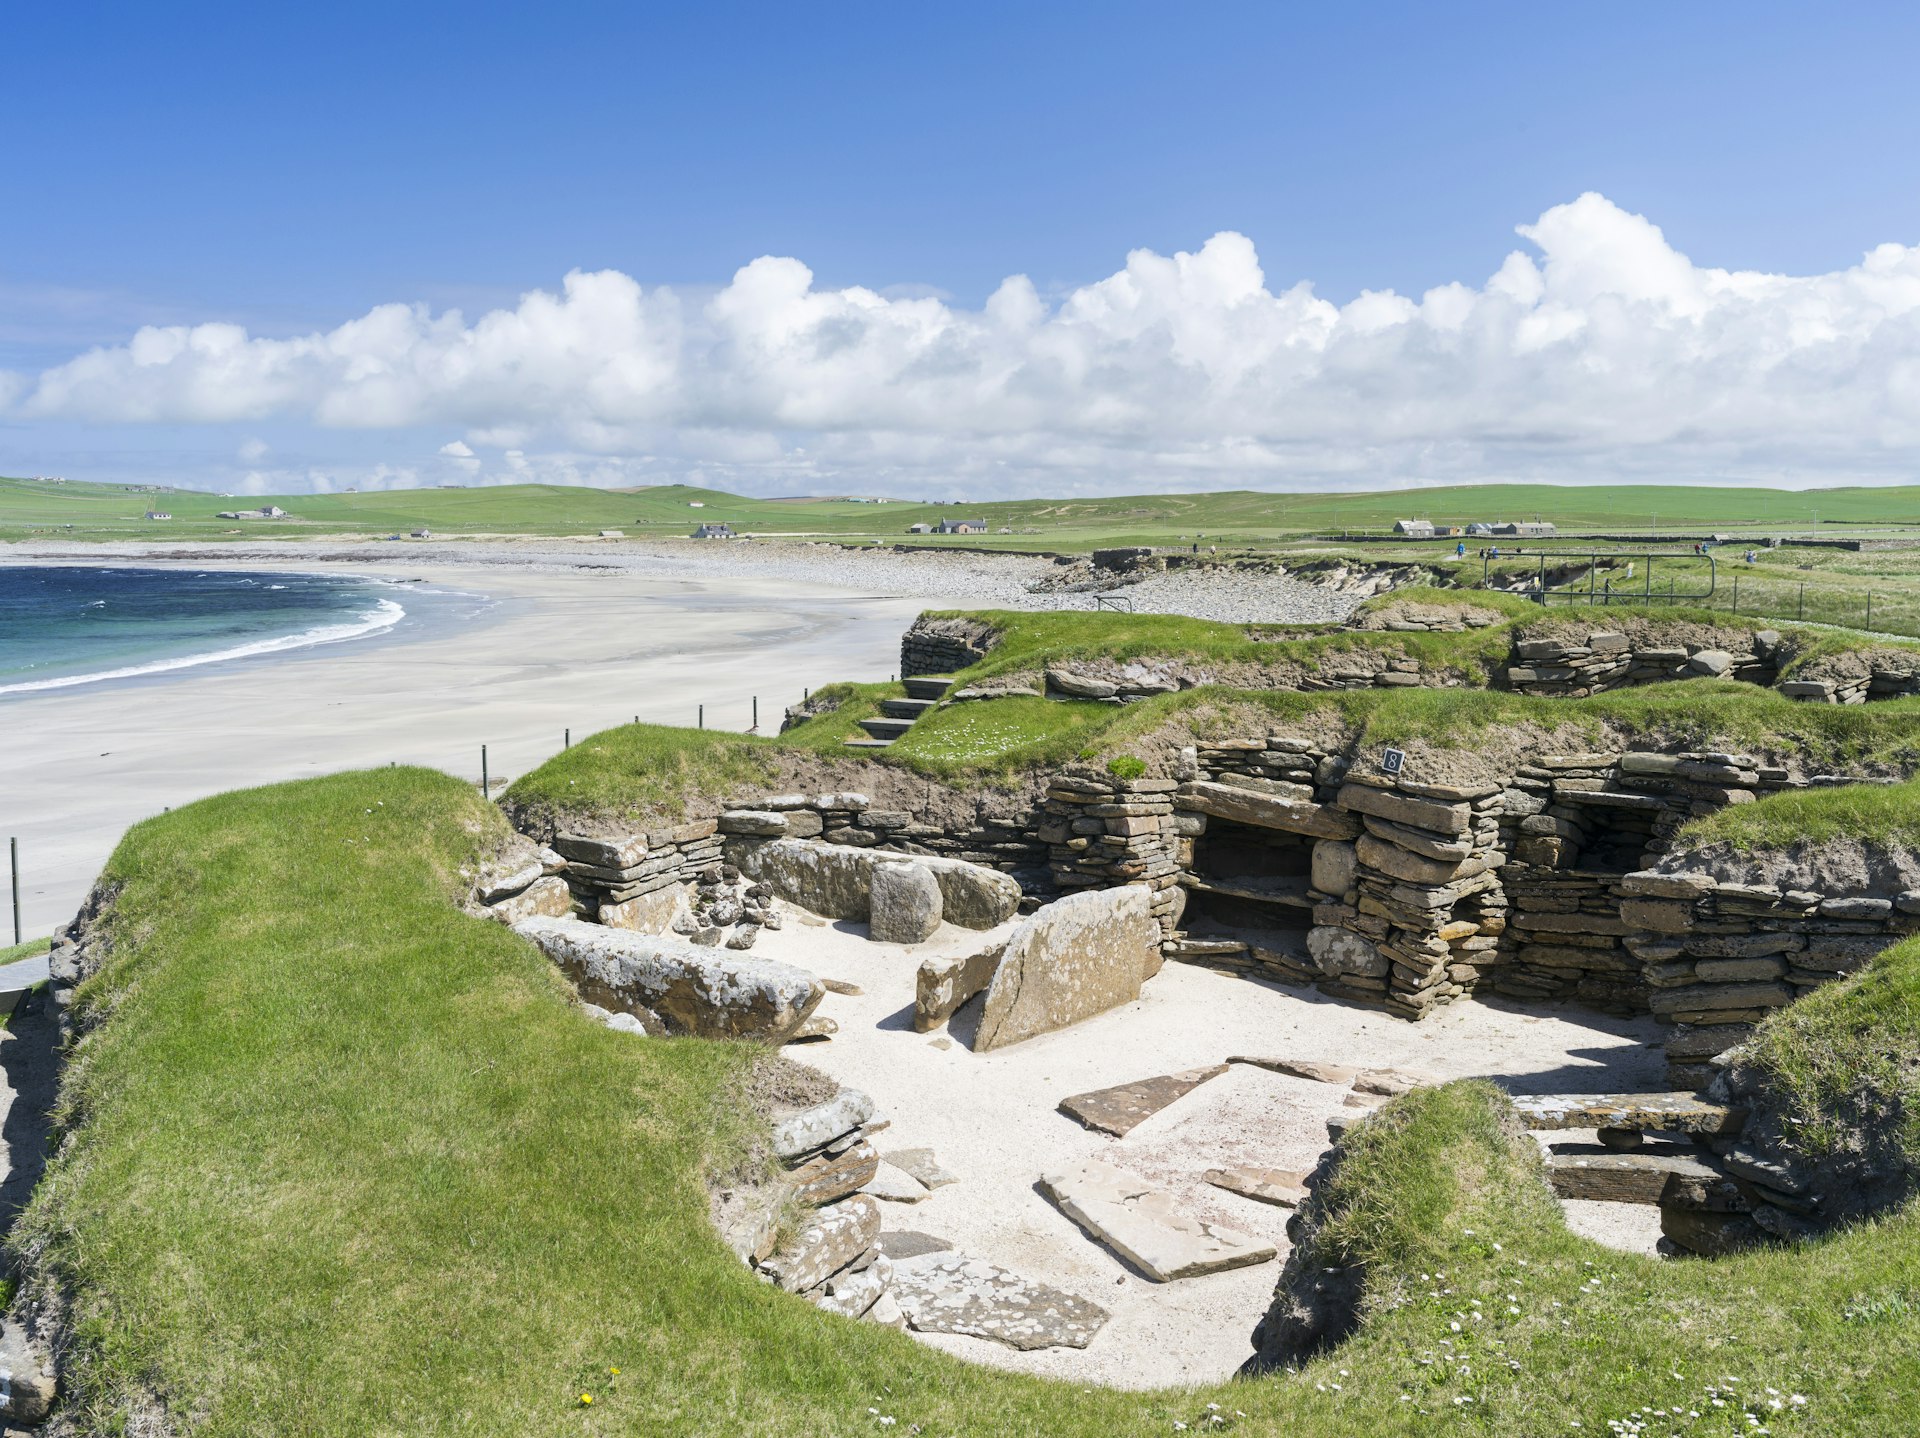 The remains of the Stone Age settlement Skara Brae, Orkney © Danita Delimont / Getty Images